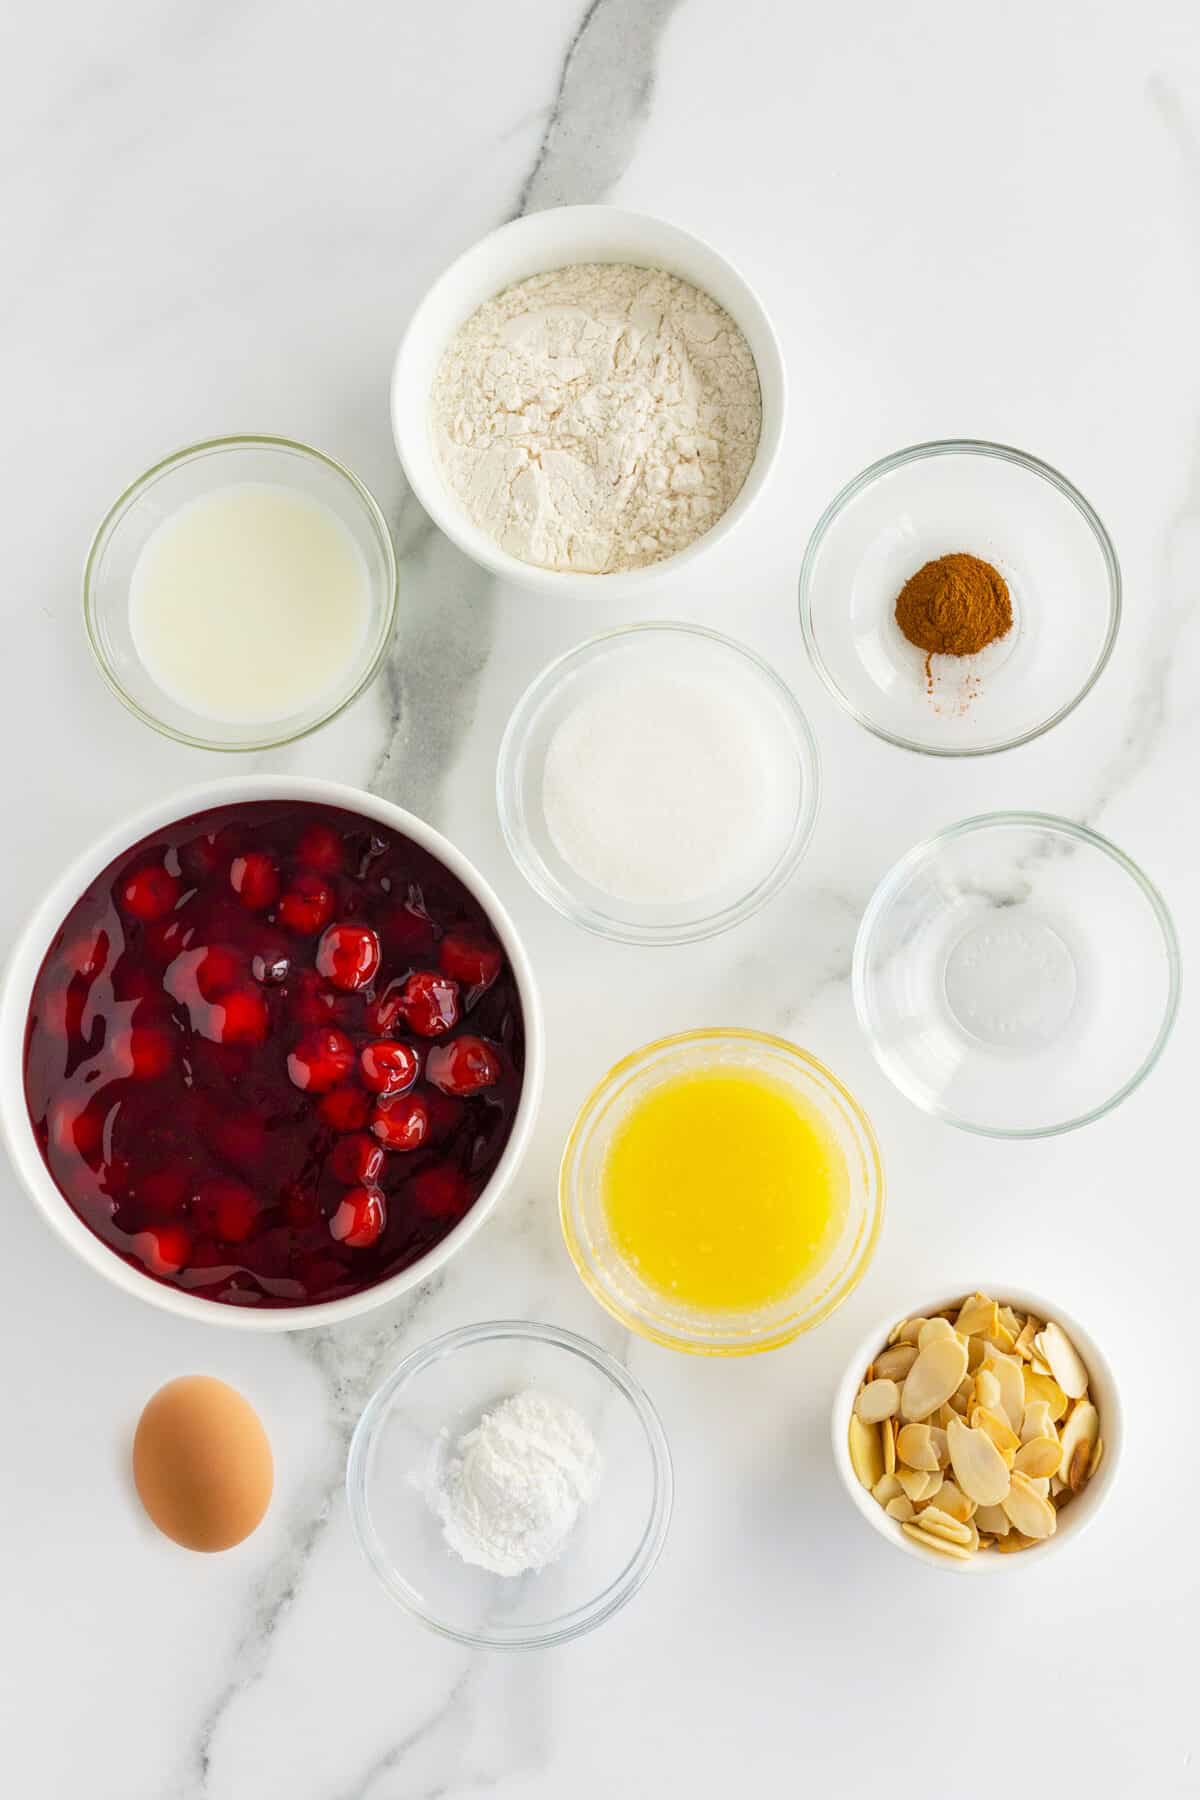 cherry cobbler ingredients in small white bowls
